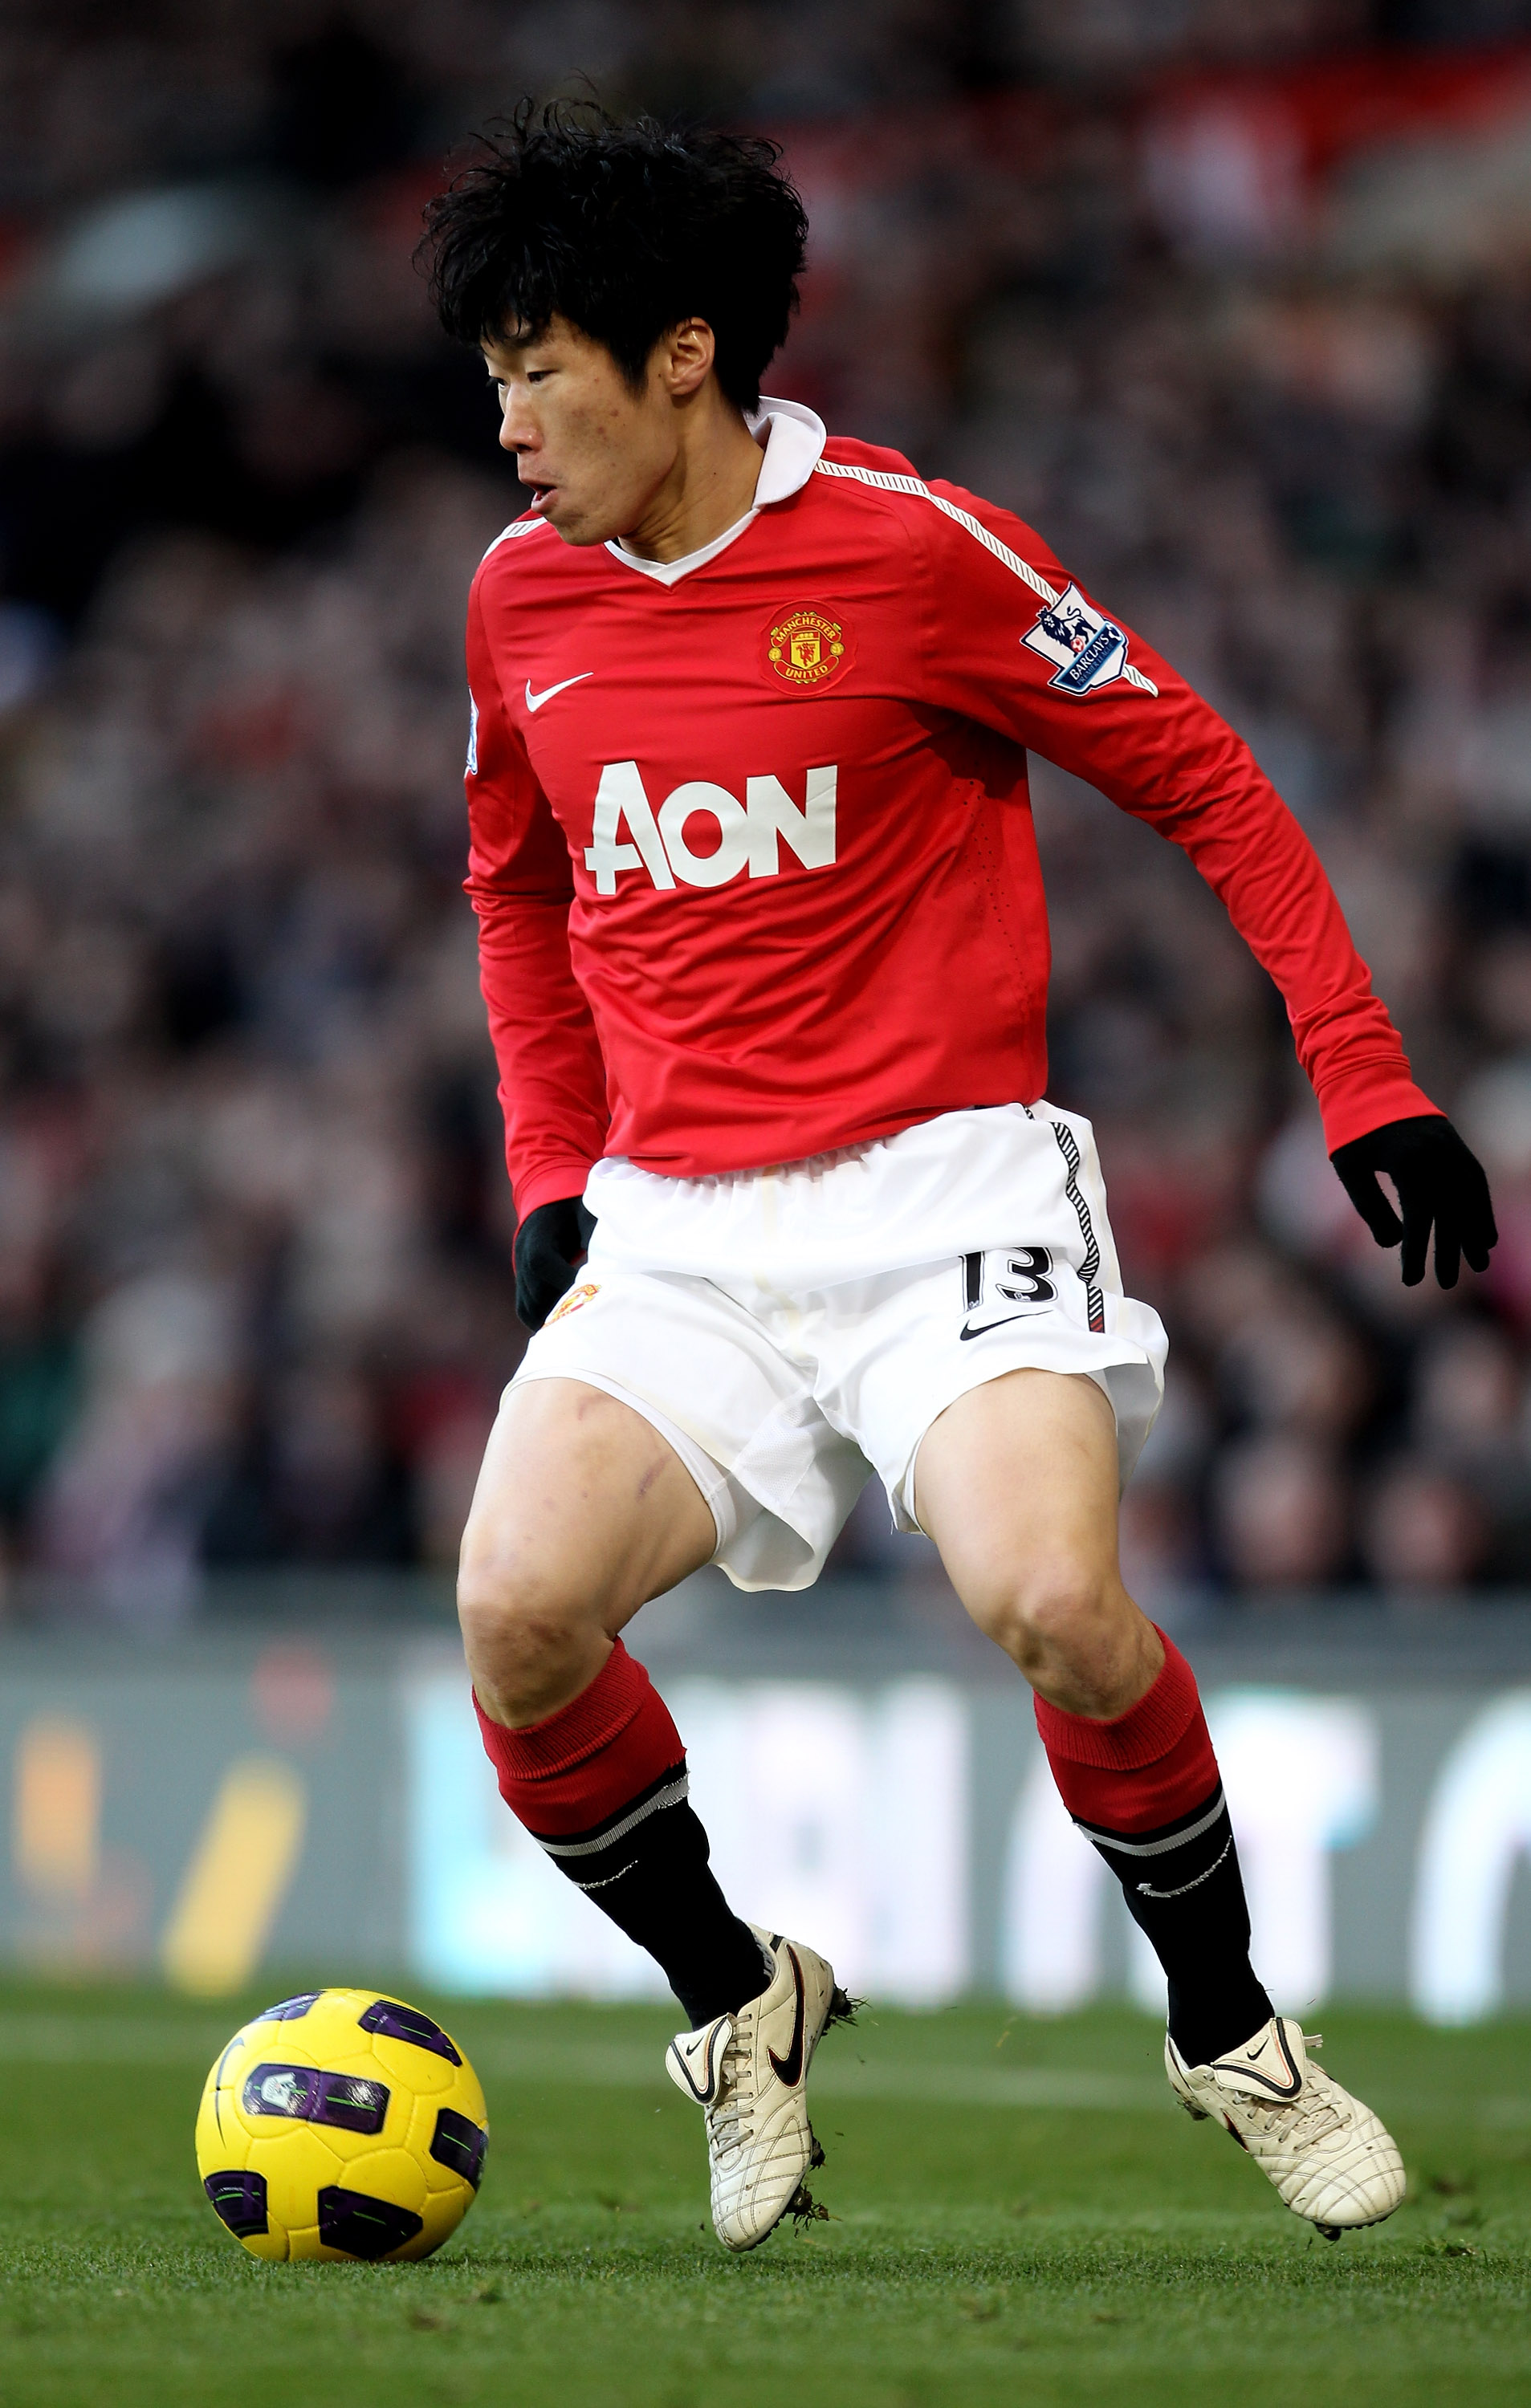 MANCHESTER, ENGLAND - NOVEMBER 27:  Ji-Sung Park of Manchester United in action during the Barclays Premier League match between Manchester United and Blackburn Rovers at Old Trafford on November 27, 2010 in Manchester, England.  (Photo by Alex Livesey/Ge